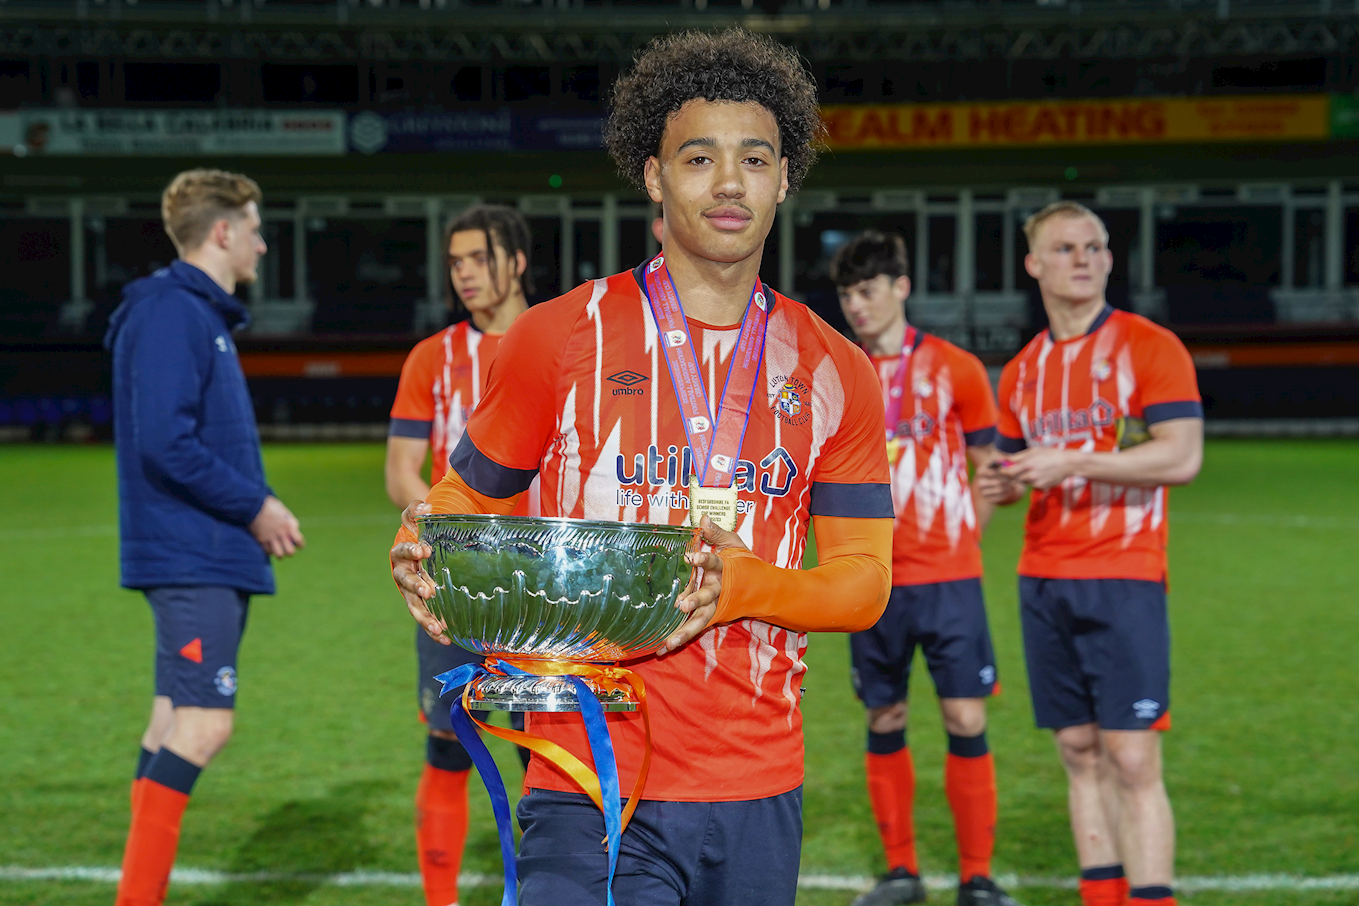 Aidan Francis-Clarke with the Beds Senior Cup trophy.